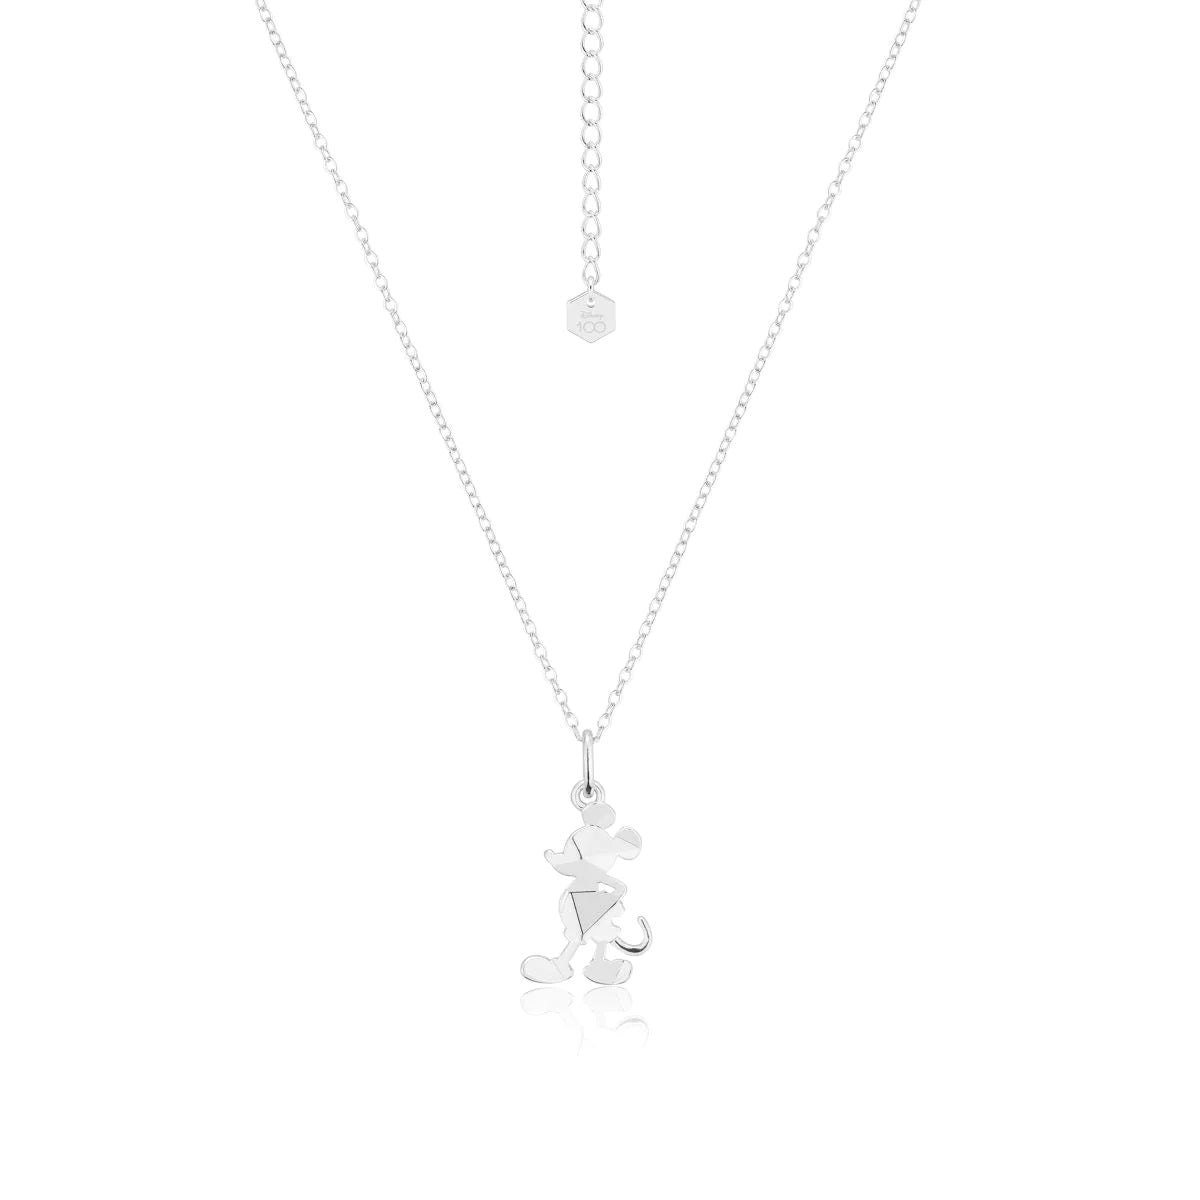 DISNEY 100 COUTURE KINGDOM MICKEY MOUSE FACET CHARM NECKLACE WHITE GOLD PLATED